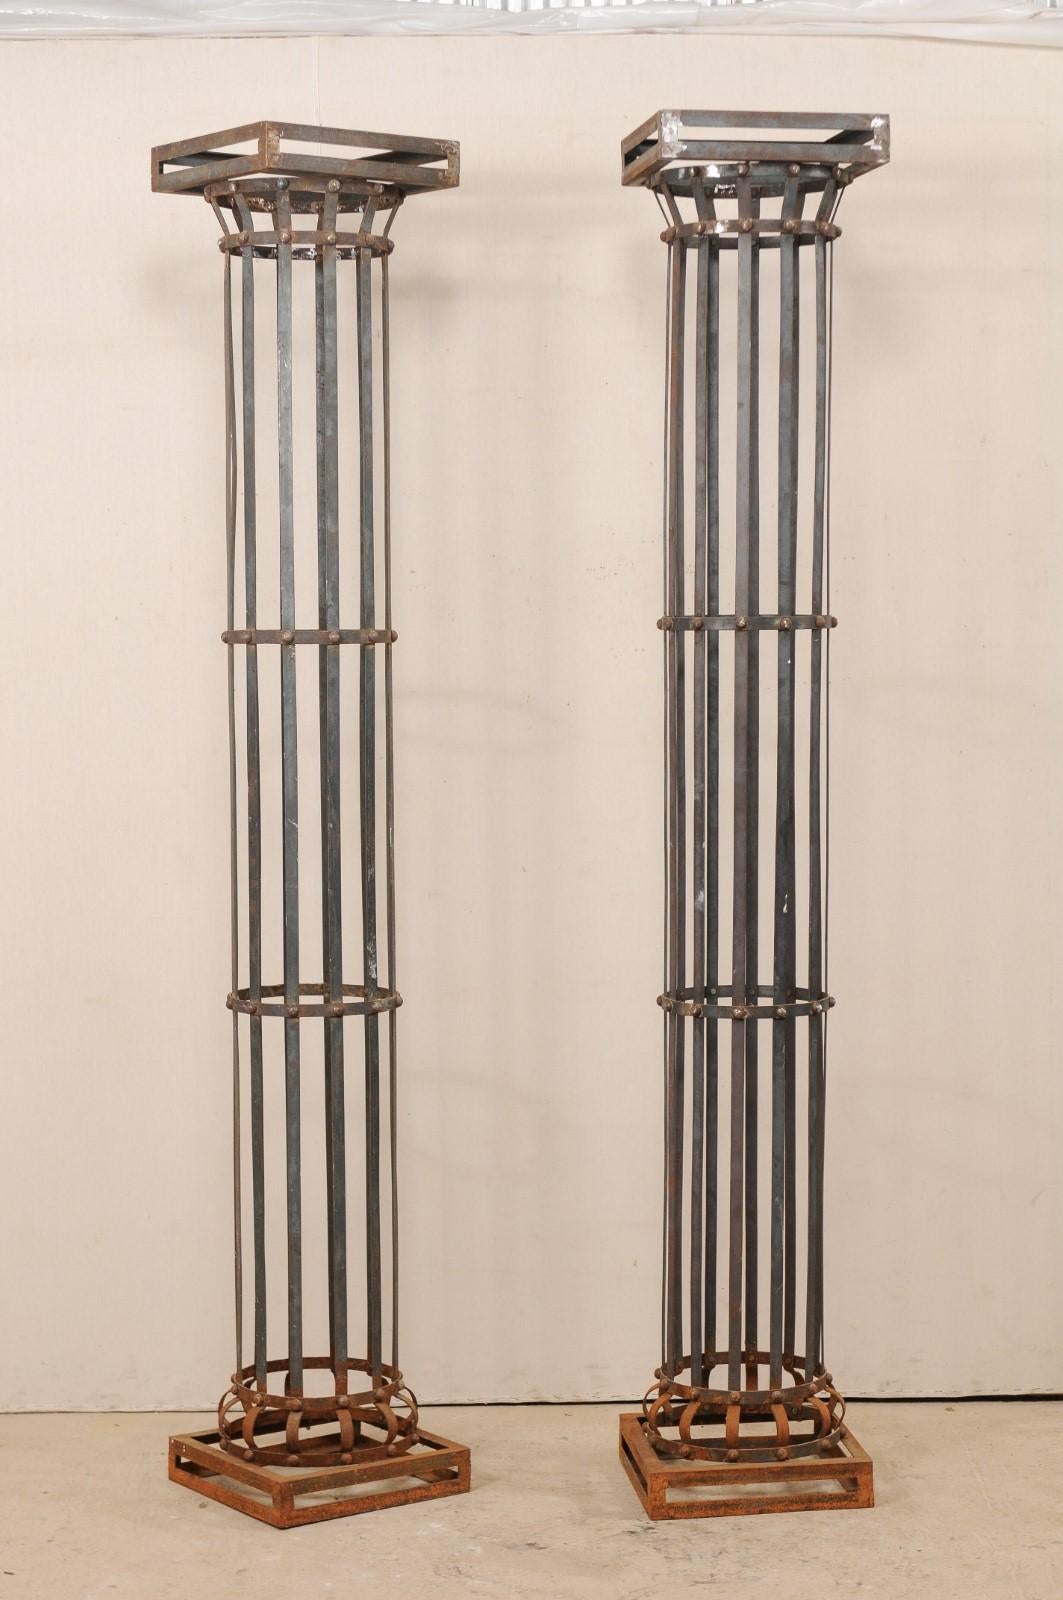 A pair of contemporary American iron architectural columns. This pair of vintage columns feature a round shaped shaft, comprised of vertically set iron strips, with a square-shaped capital and base. Each column standing approximately 8 feet in